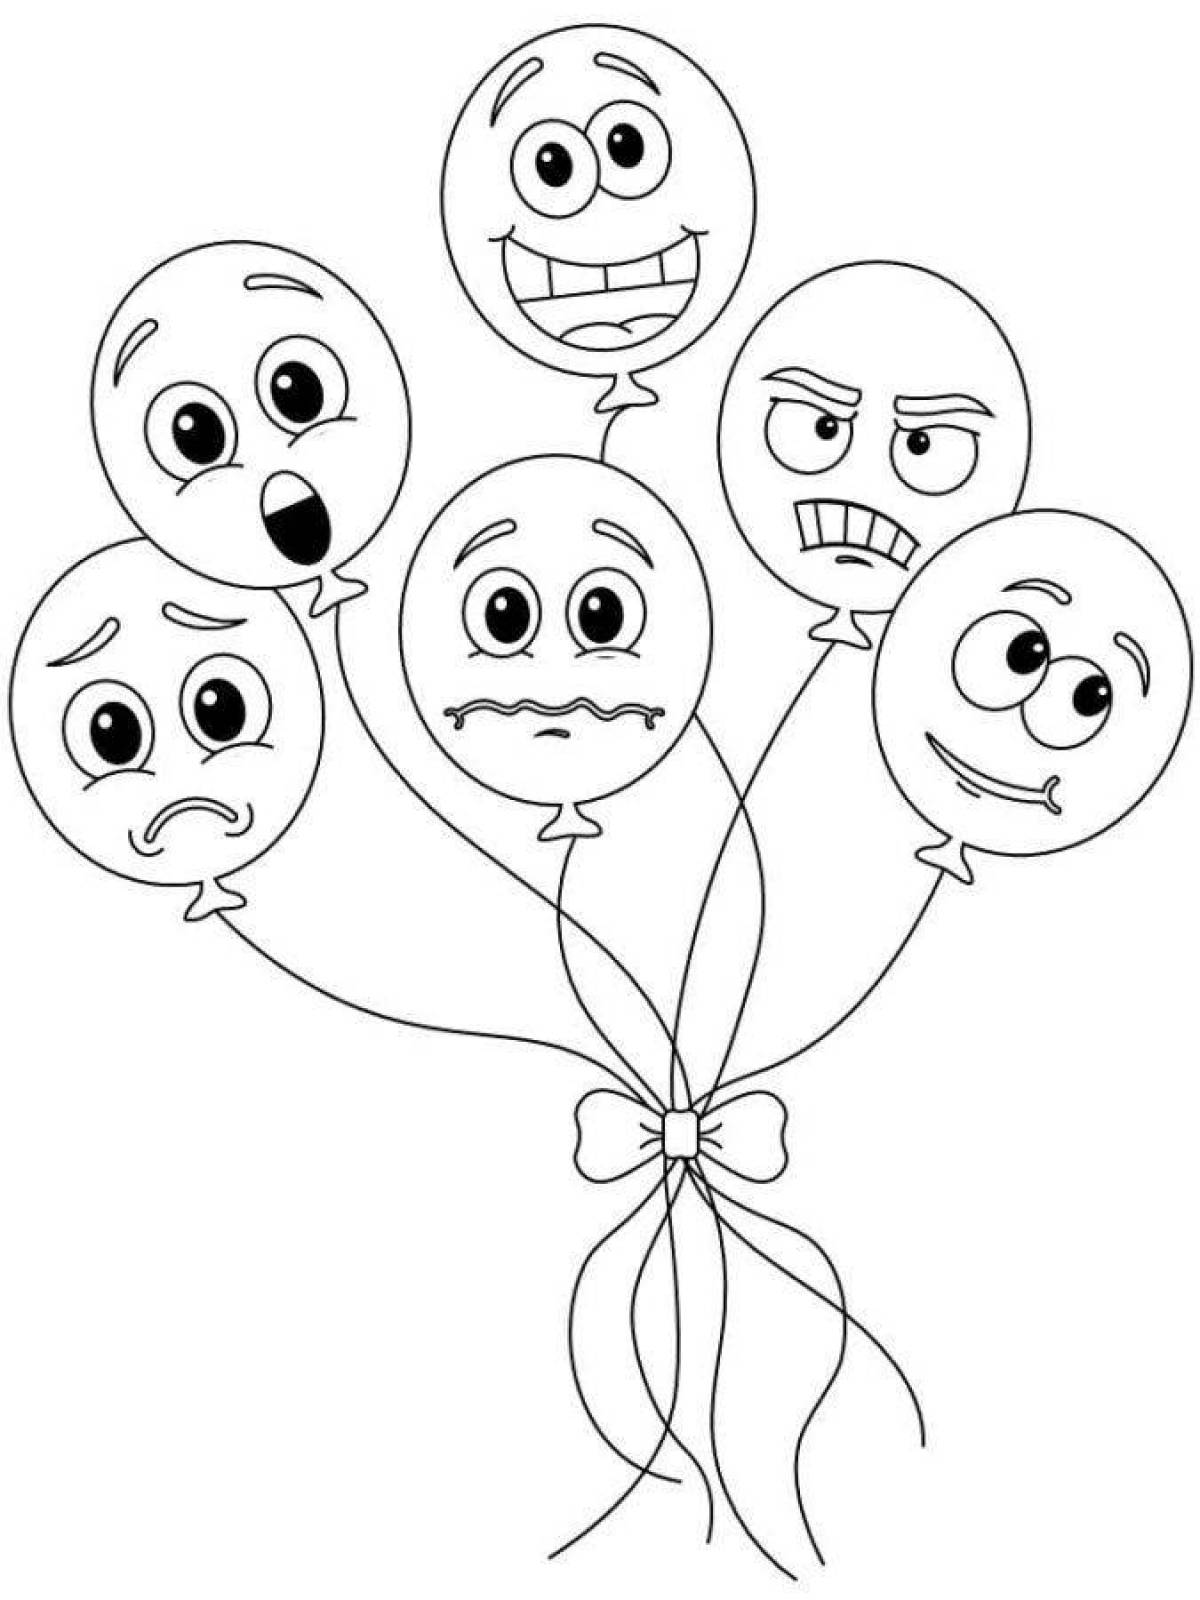 Glowing coloring pages with emotions